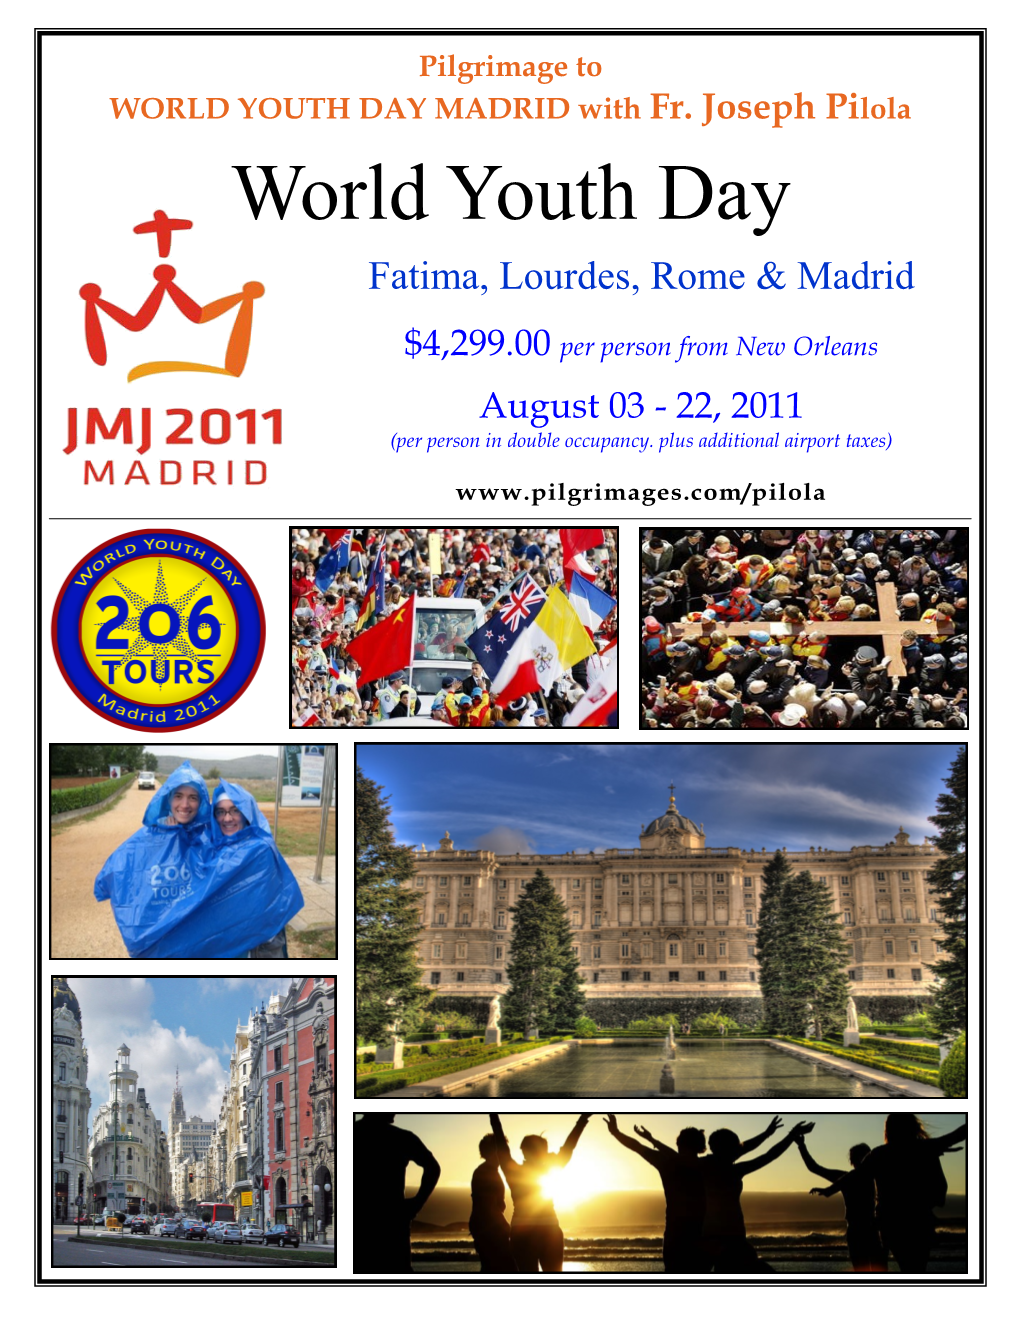 WORLD YOUTH DAY MADRID with Fr